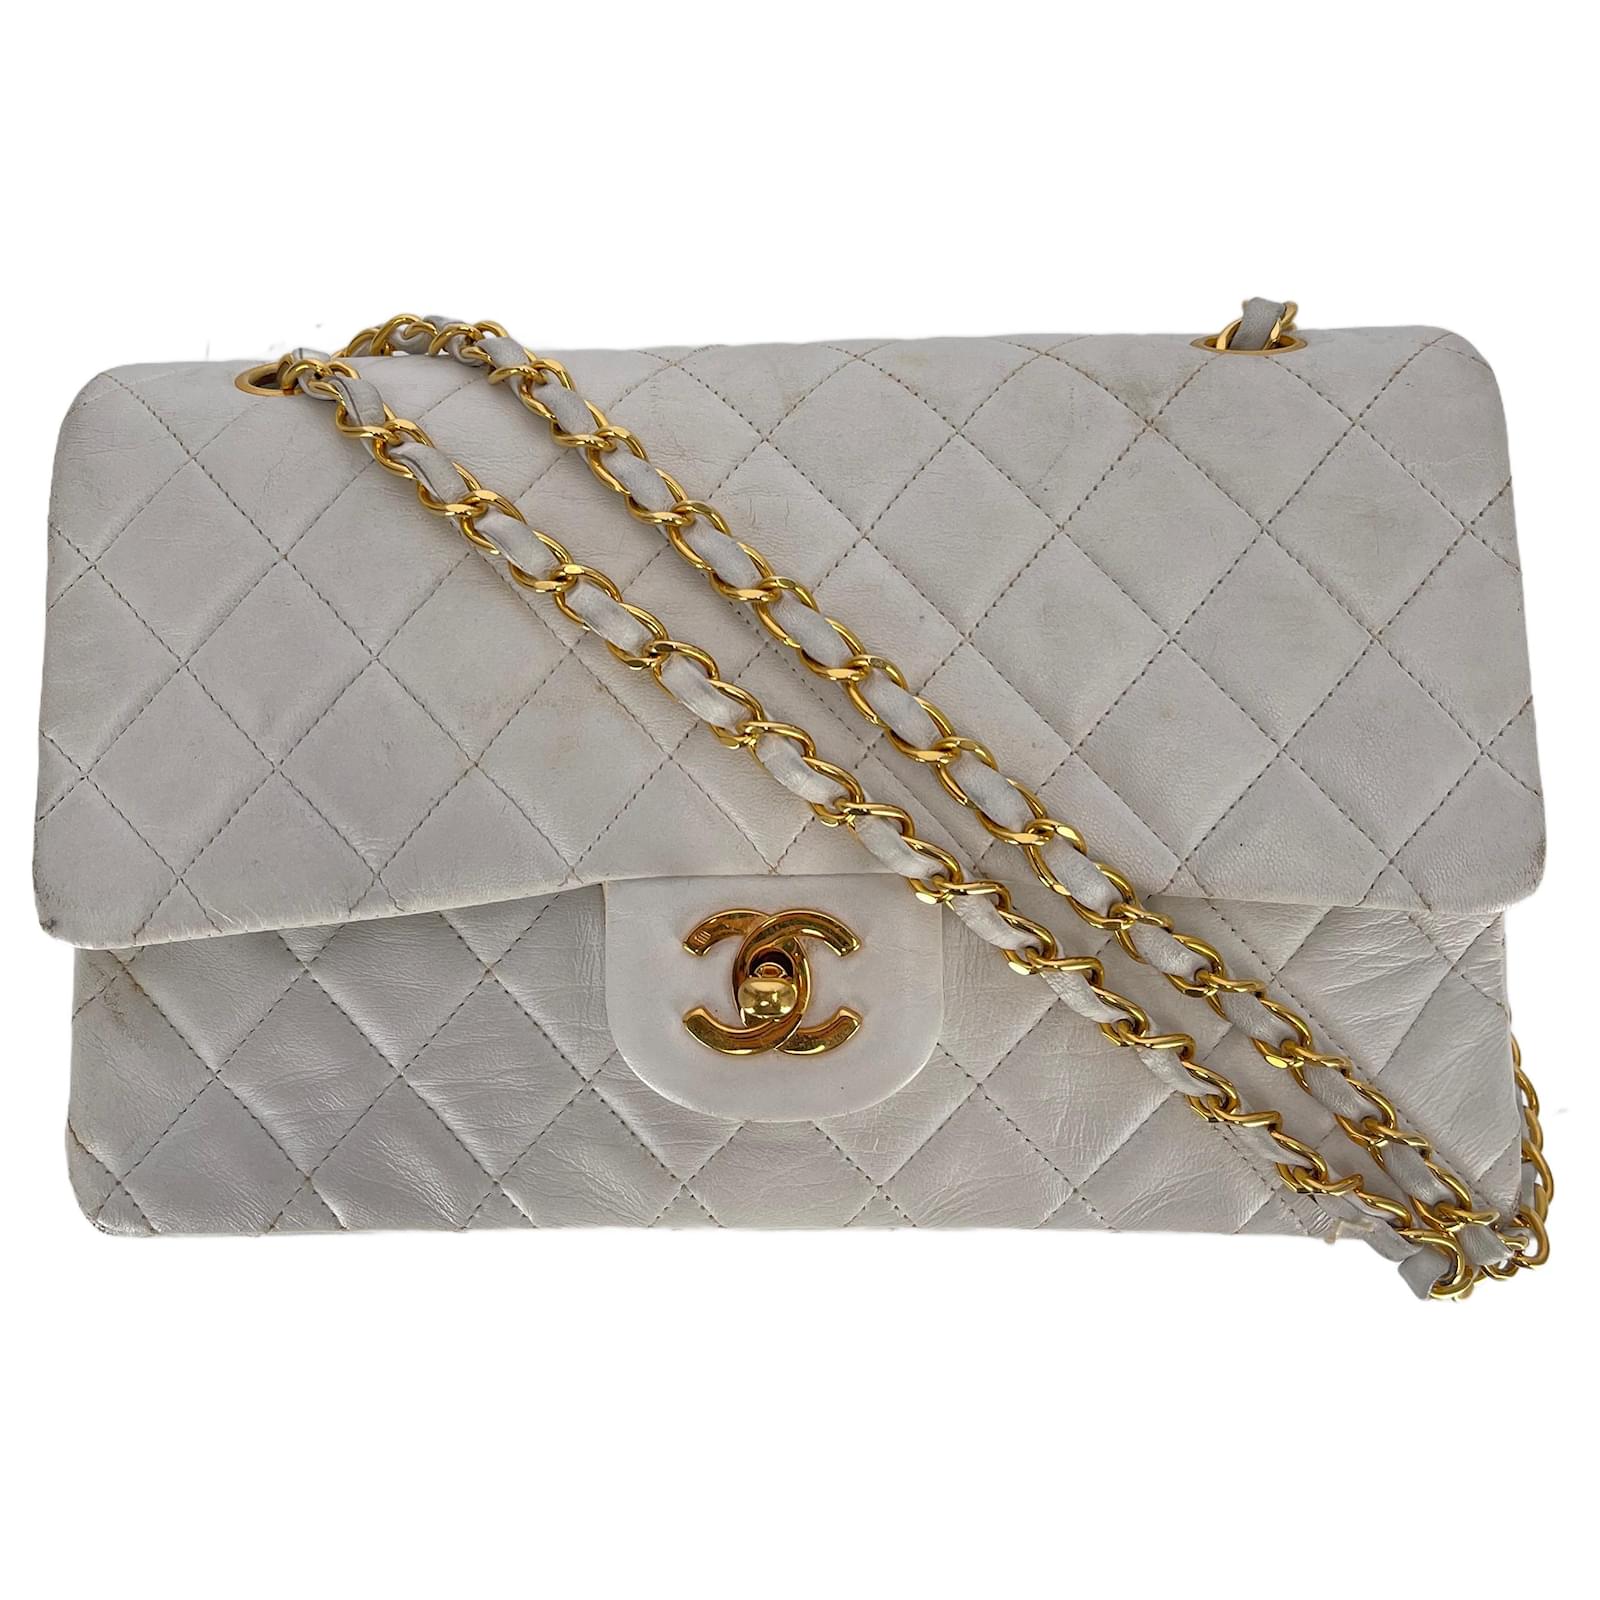 My First Chanel Bag - Mademoiselle